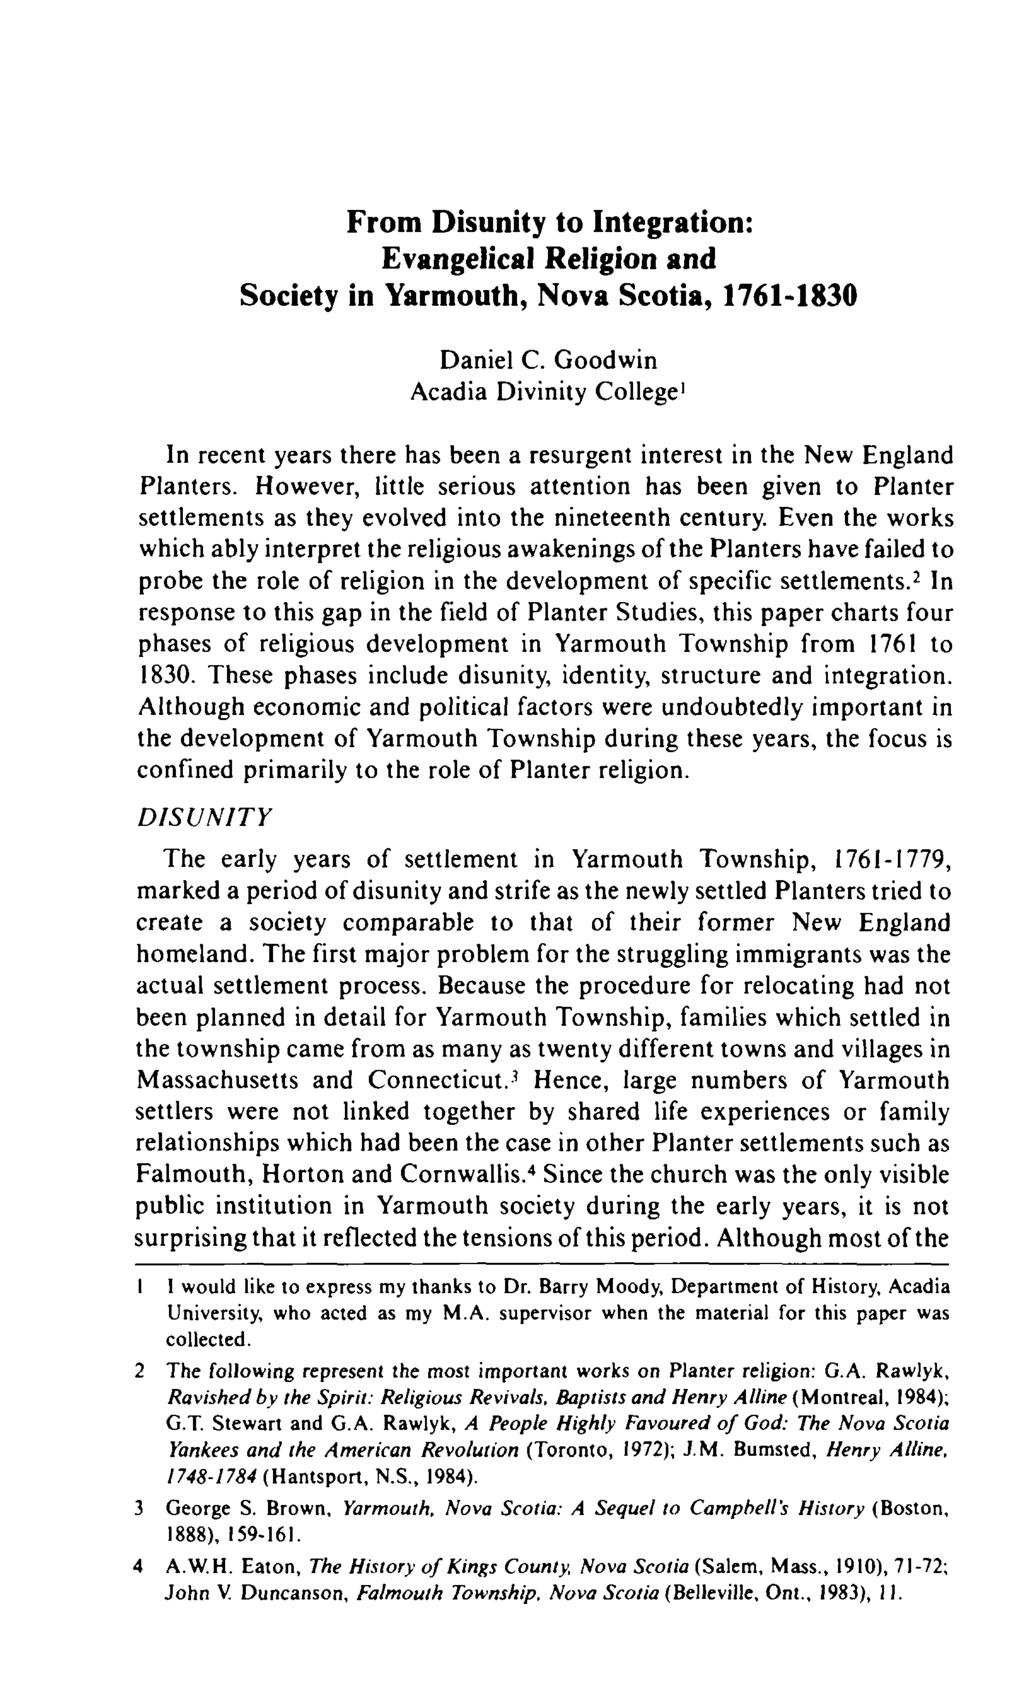 From Disunity to Integration: Evangelical Religion and Society in Yarmouth, Nova Scotia, 1761-1830 Daniel C.